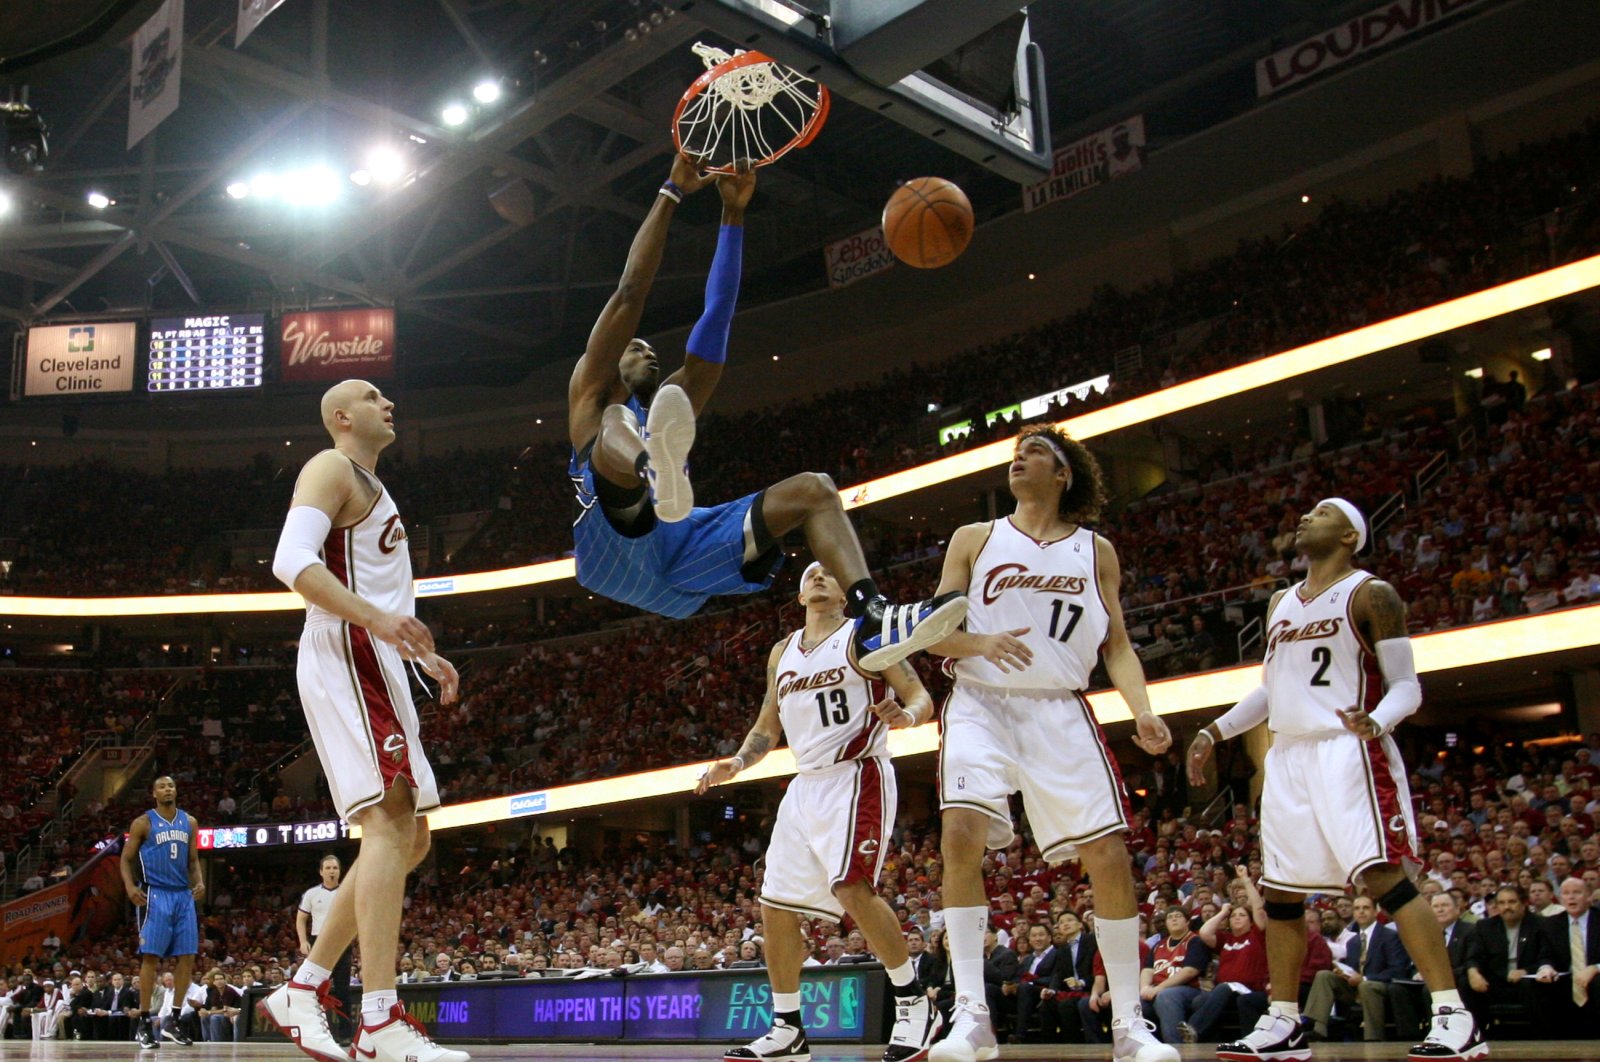 Orlando Magic center Dwight Howard knocks the 24-second clock off the backboard with a ferocious dunk during his side's 107-106 victory against Cleveland Cavaliers, May 20, 2009. (Reuters Photo)